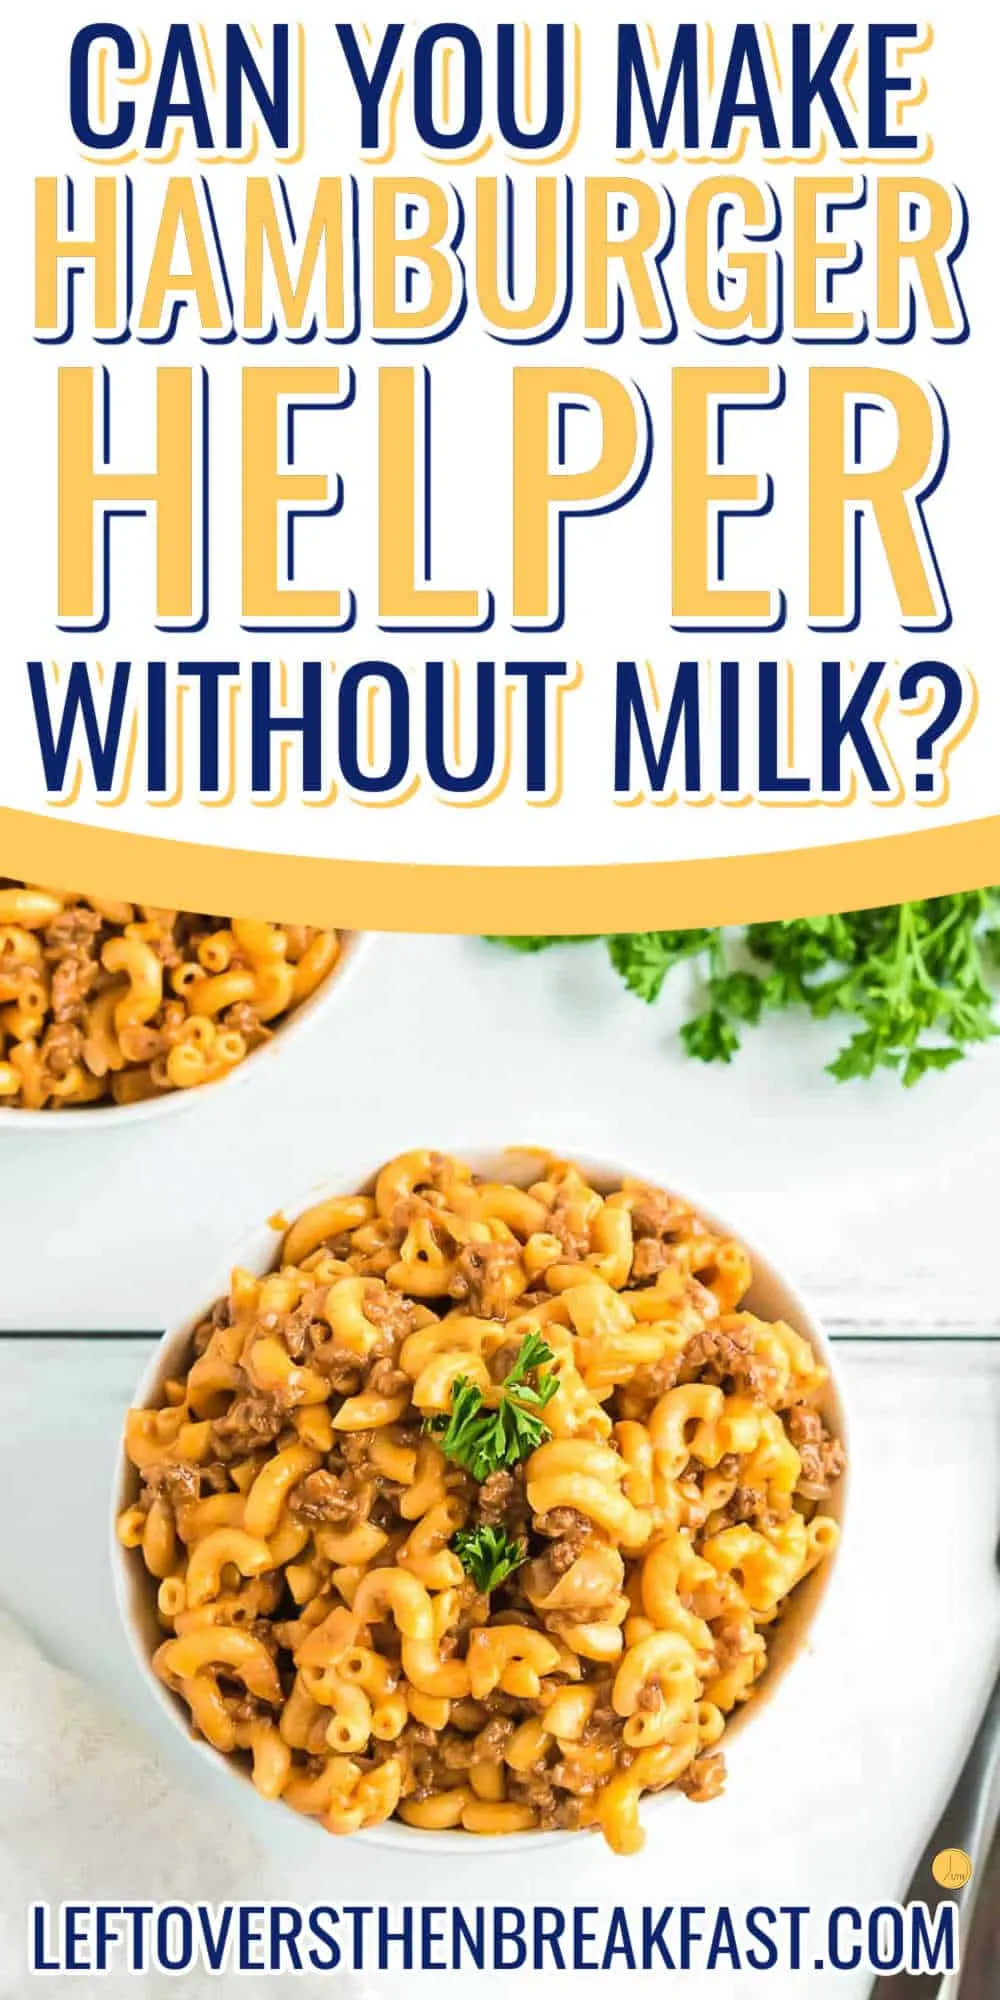 bowl of pasta with meat and a banner with text about hamburger helper and milk